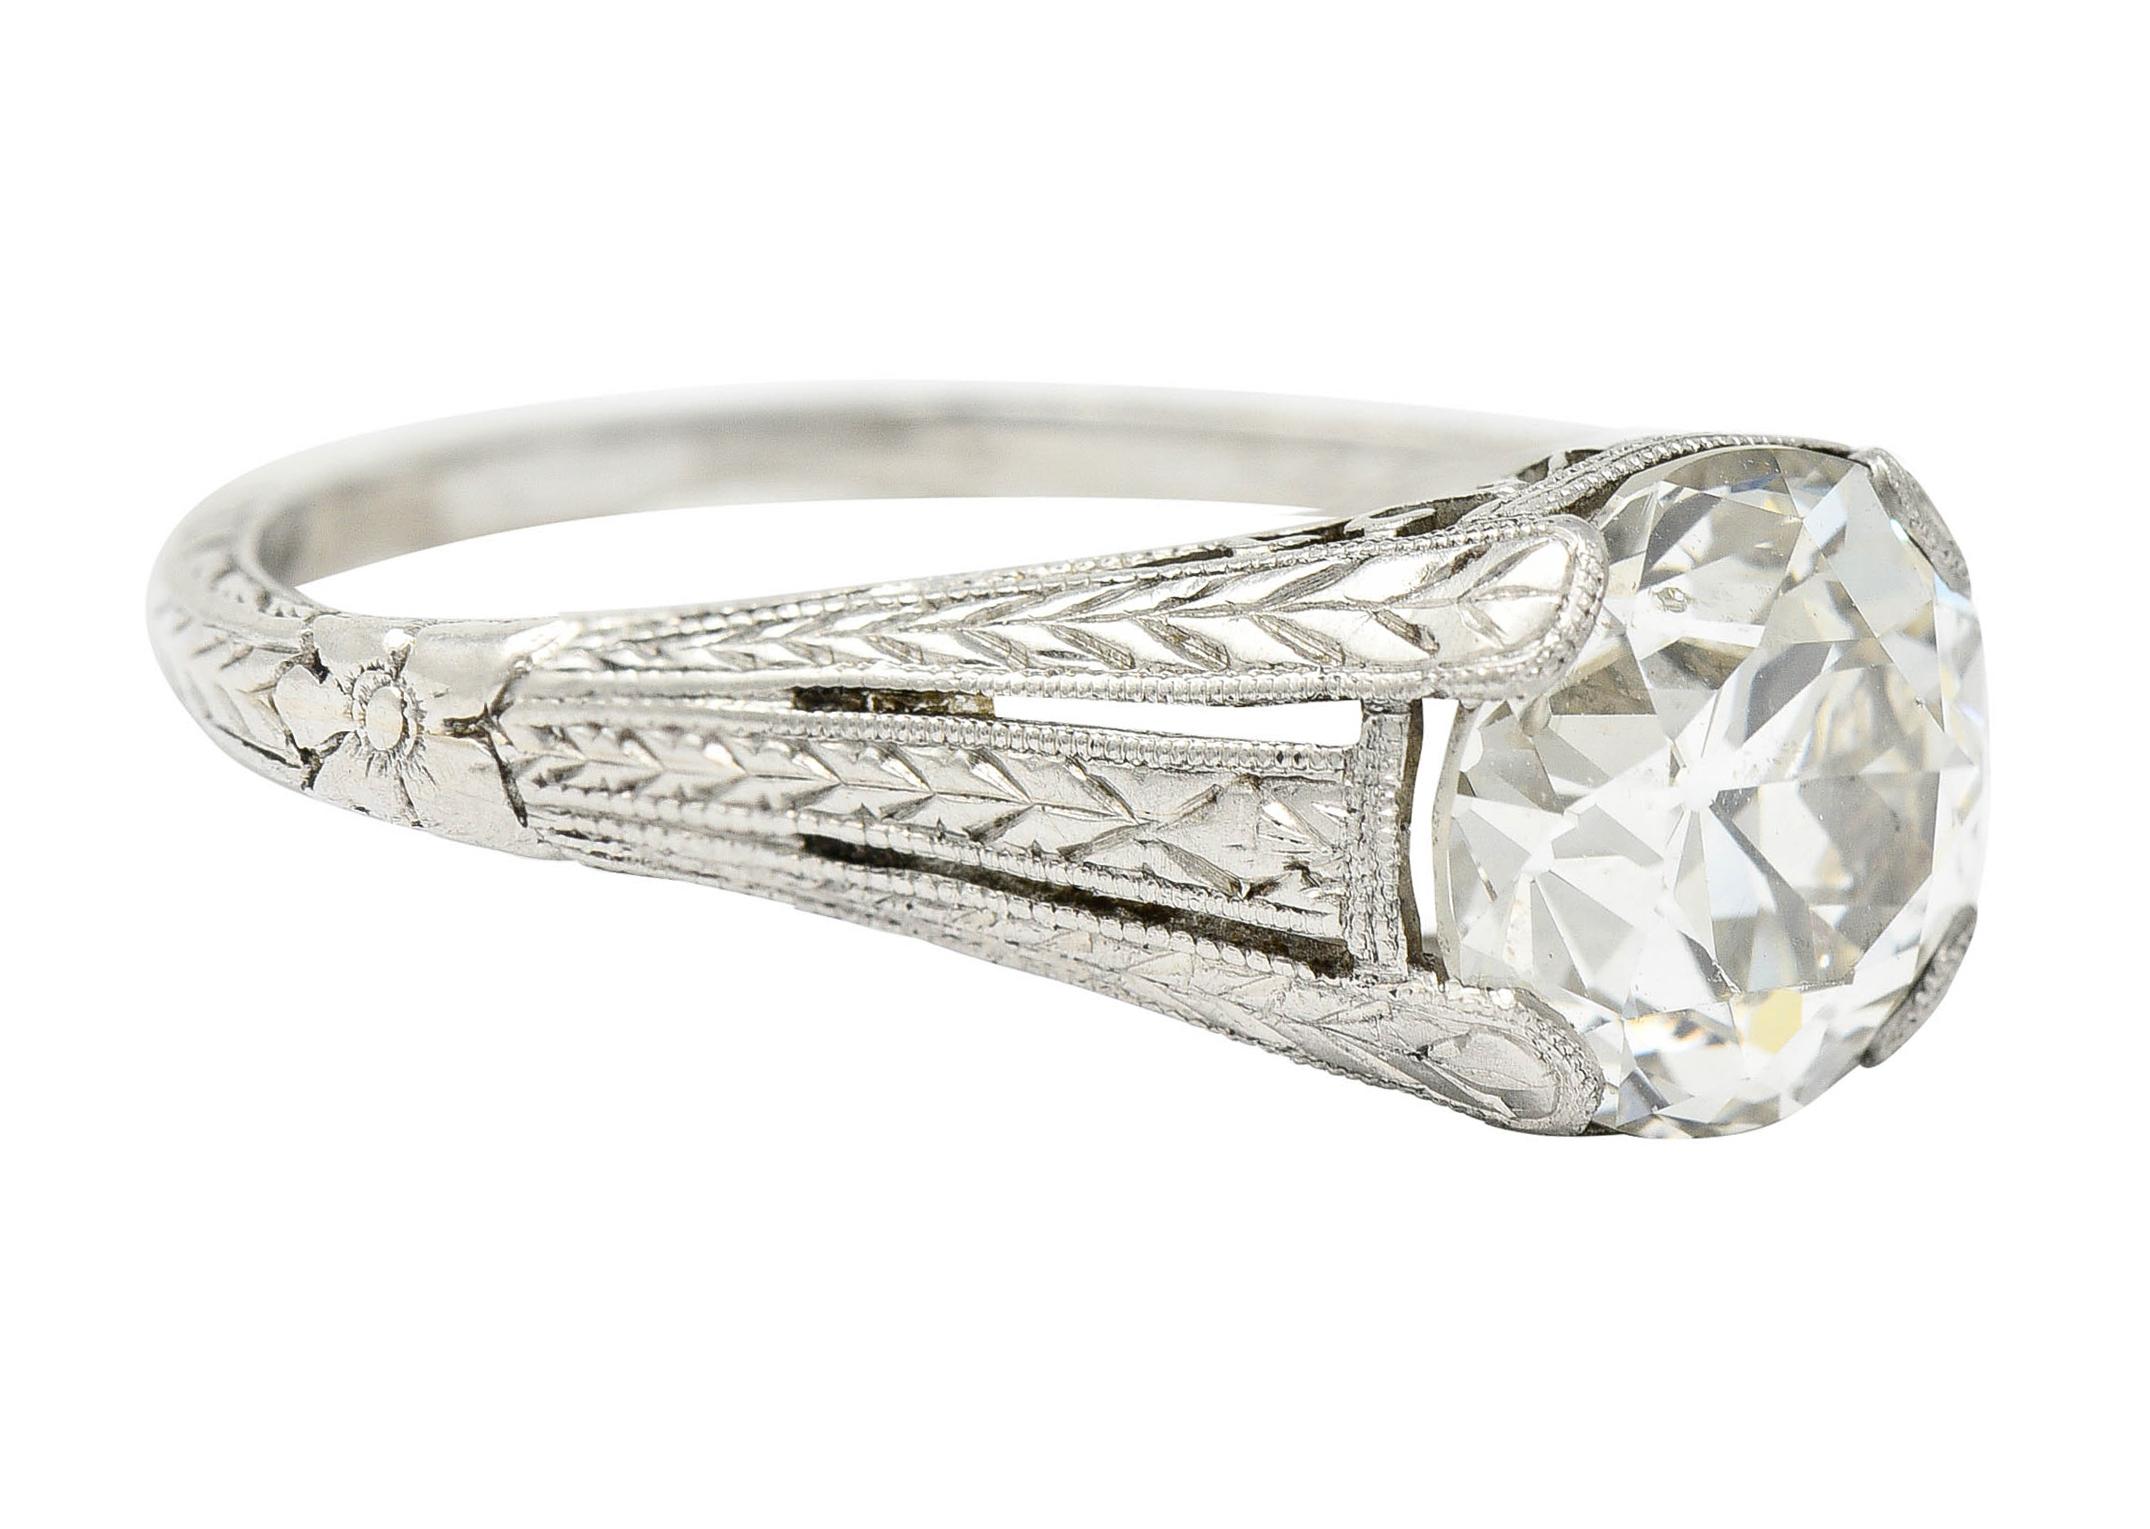 Centering an old European cut diamond weighing 1.79 carats - K color with SI clarity

Set by wide prongs with a pierced gallery depicting a scrolling lotus motif

With deeply engraved tri-split shoulders depicting a wheat motif and orange blossom